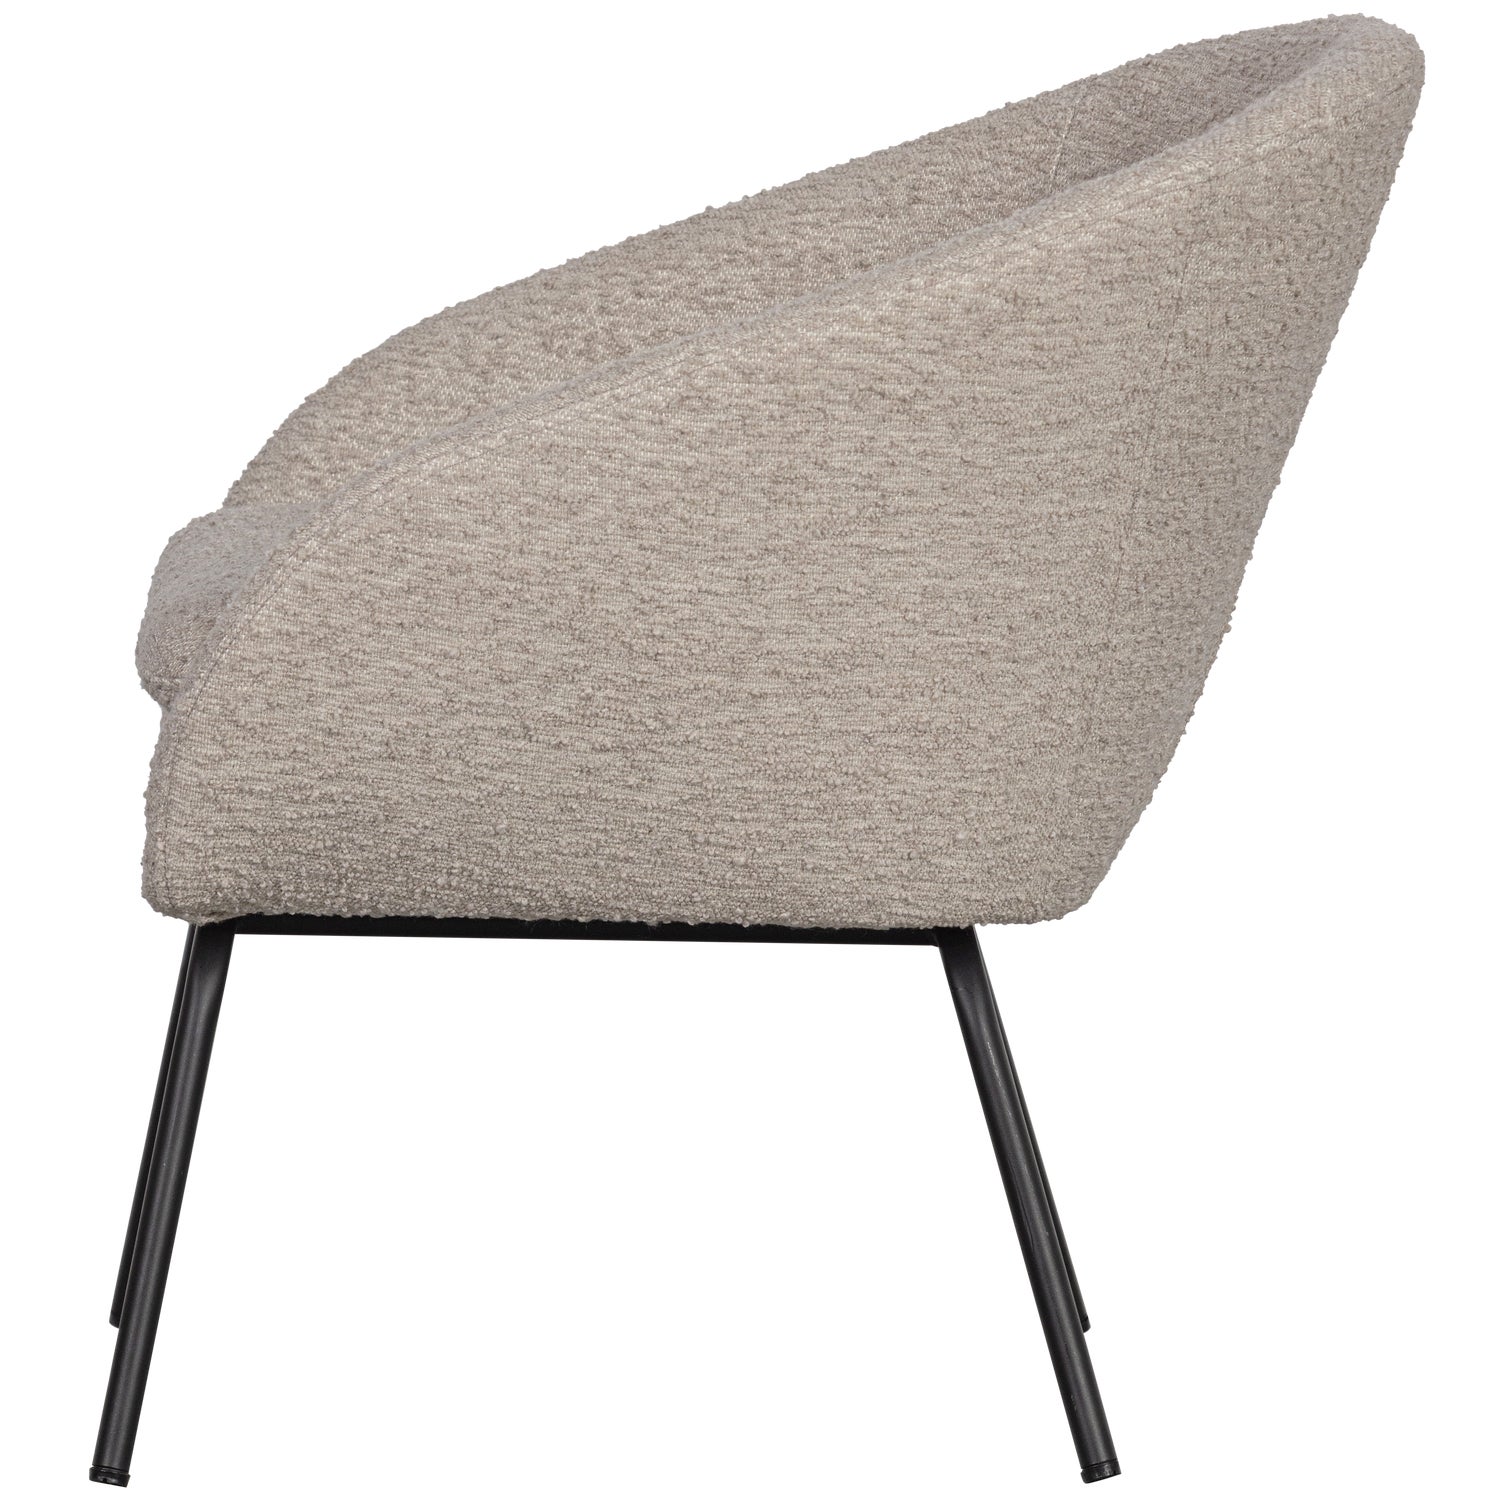 375919-G-03_VS_KW_Ditte_fauteuil_boucle_greige.png?auto=webp&format=png&width=1500&height=1500